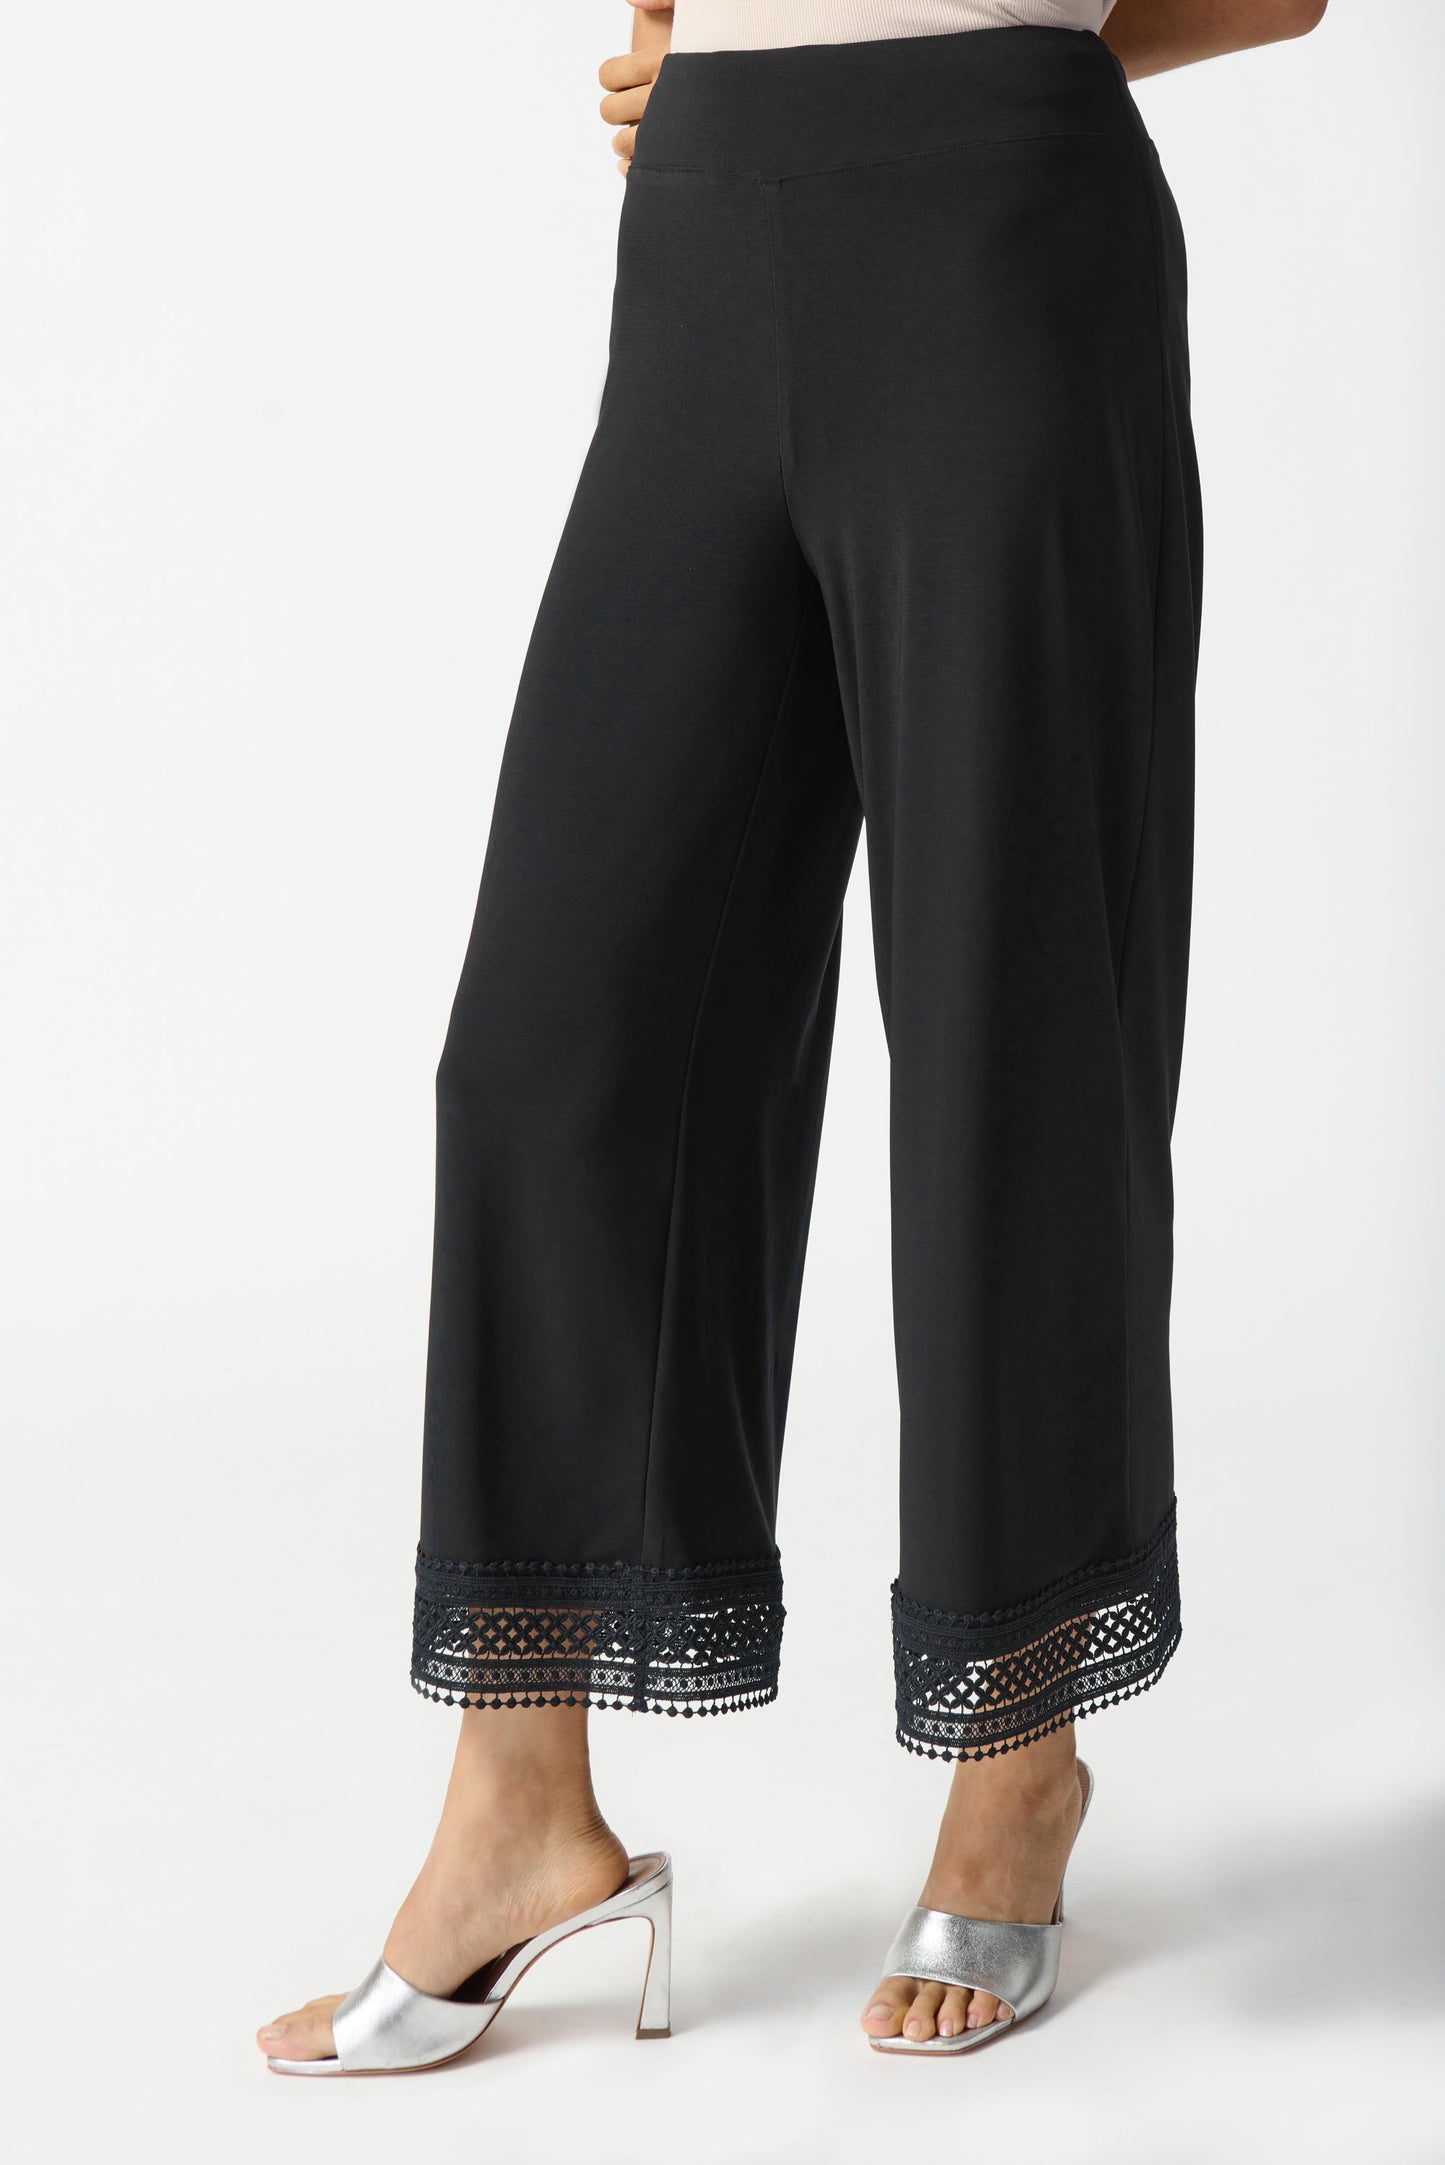 Silky Knit Pull-On Culotte Pants
242134